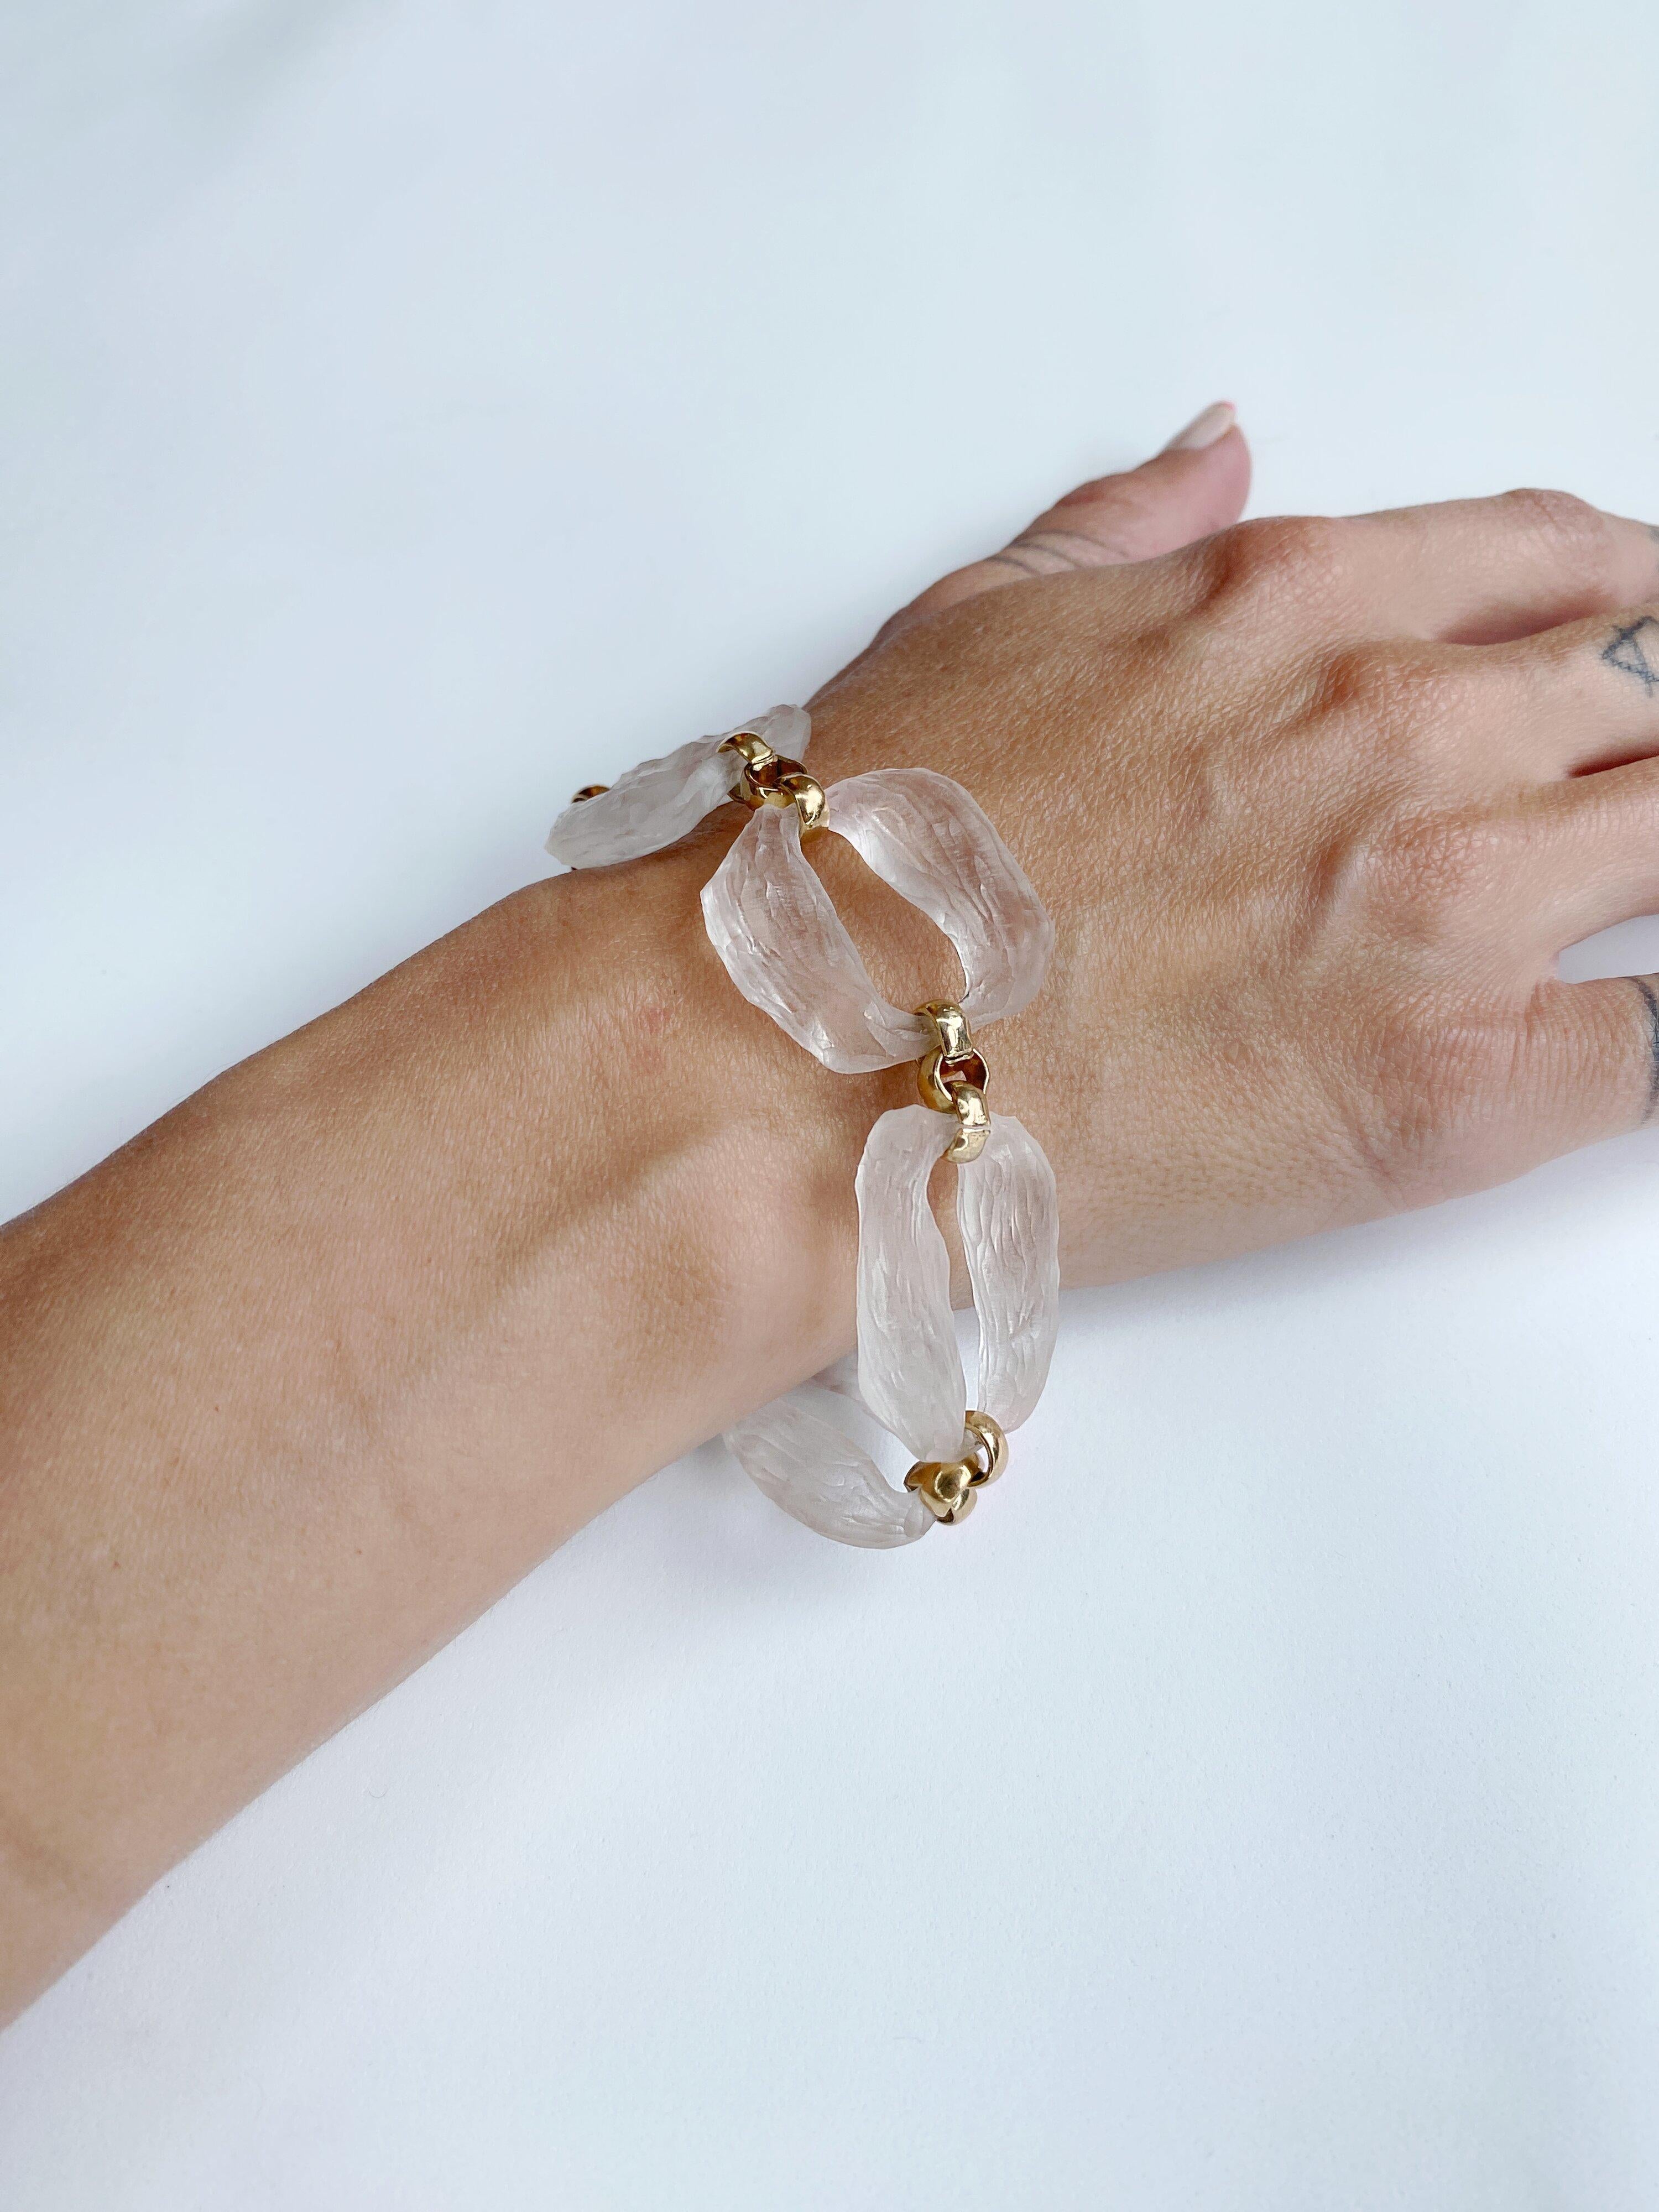 Chunky, elegant and timeless. This hand carved bracelet features clear lucite links resembling quartz crystal. Each link is connected with gold filled chain, making this bracelet a real eye catcher, yet confortable and durable.